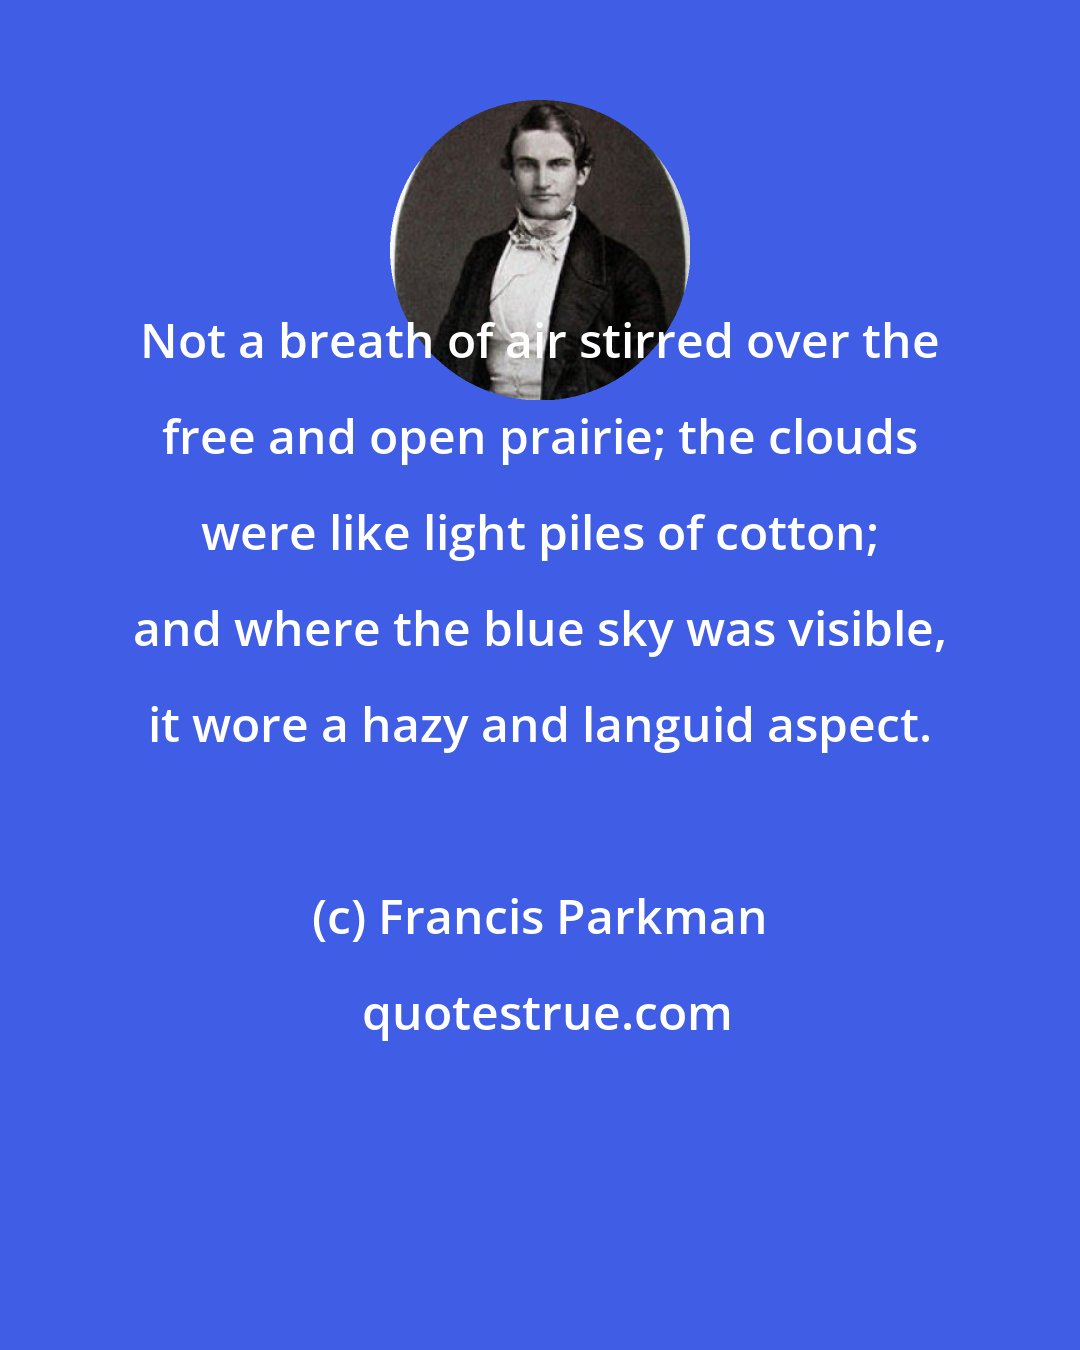 Francis Parkman: Not a breath of air stirred over the free and open prairie; the clouds were like light piles of cotton; and where the blue sky was visible, it wore a hazy and languid aspect.